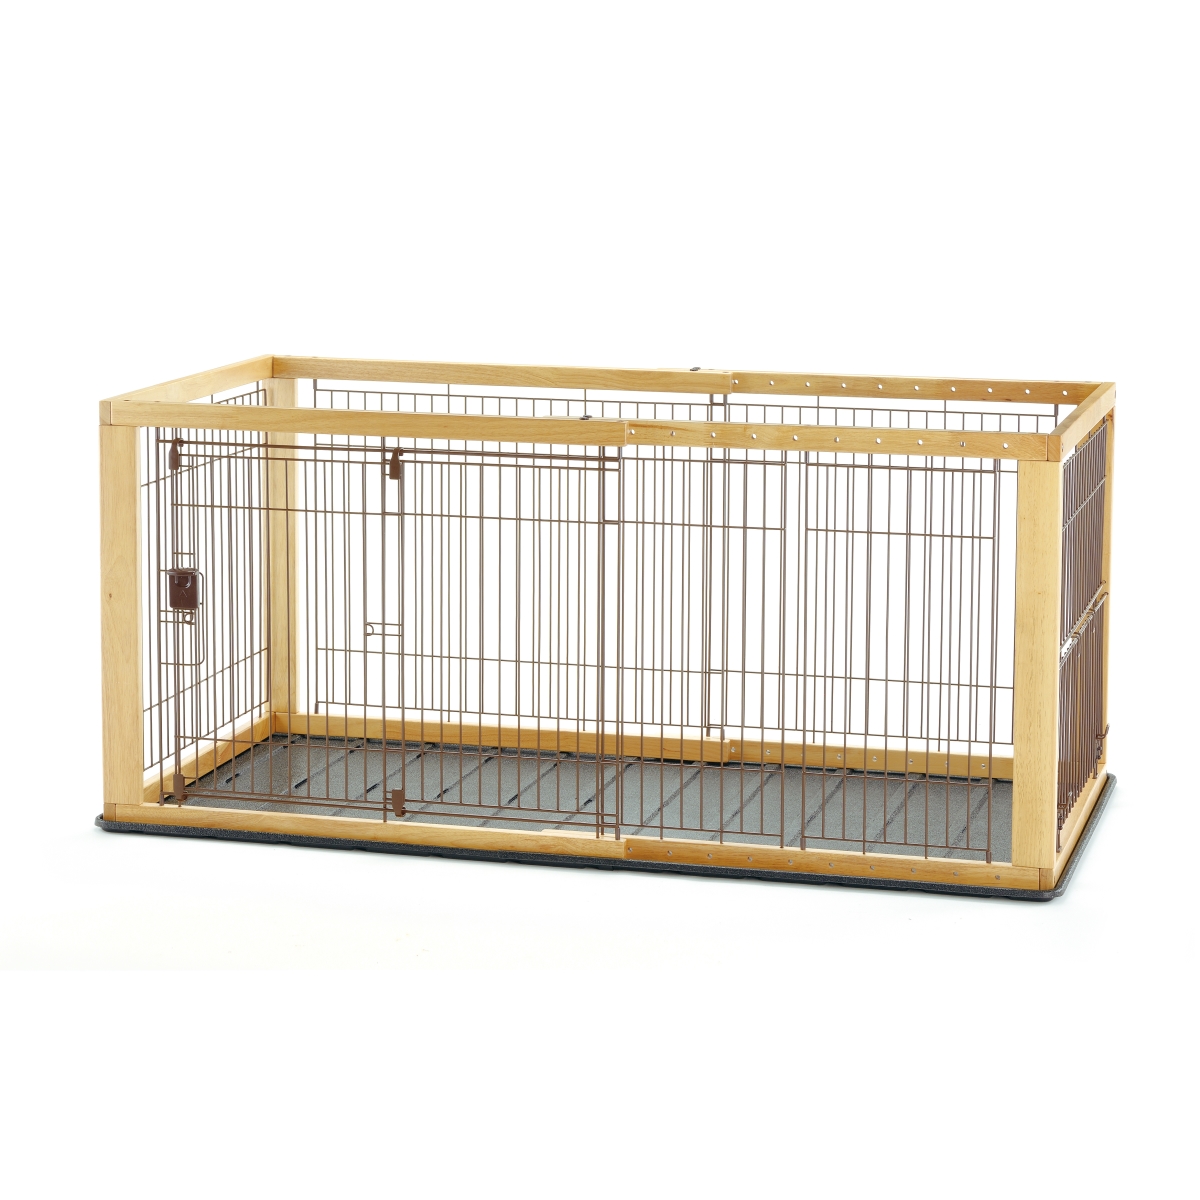 Picture of Richell 80008 Richell Expandable Pet Crate Medium